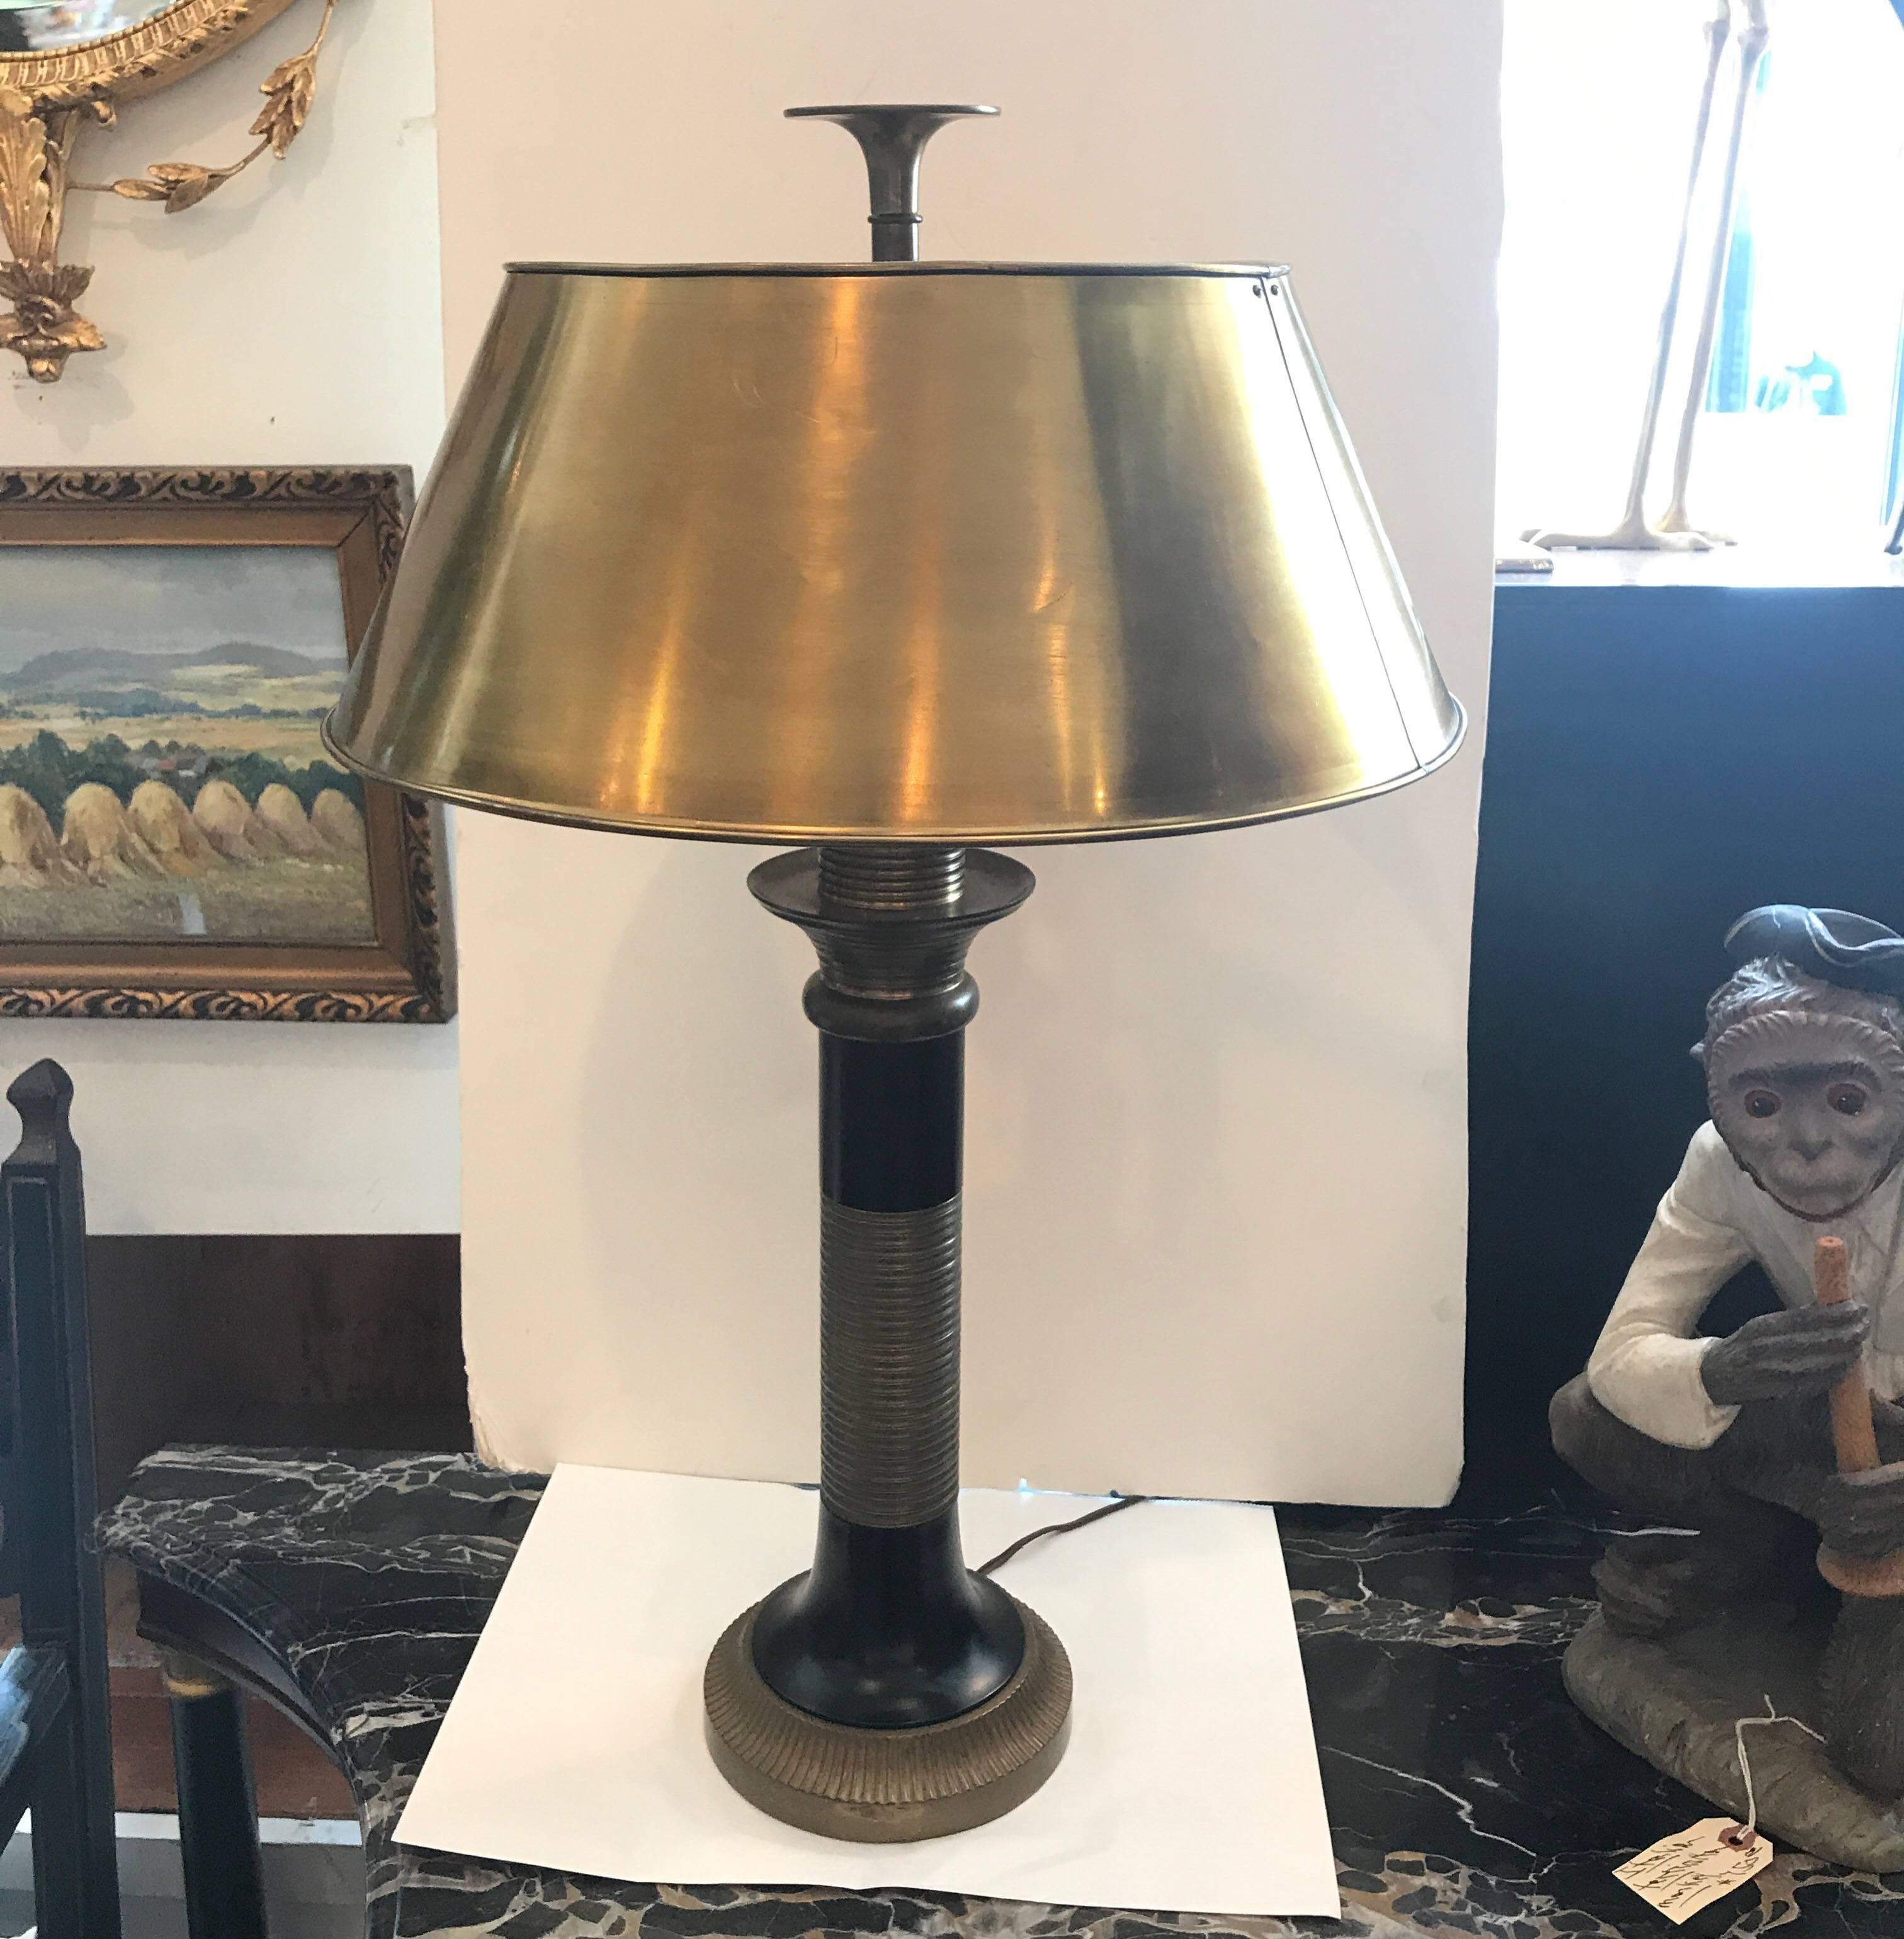 A brass and black enamel table lamp by Chapman. The brass shade supported by a ribbed brass column base with black enameling. The lamp takes two standard base bulbs.